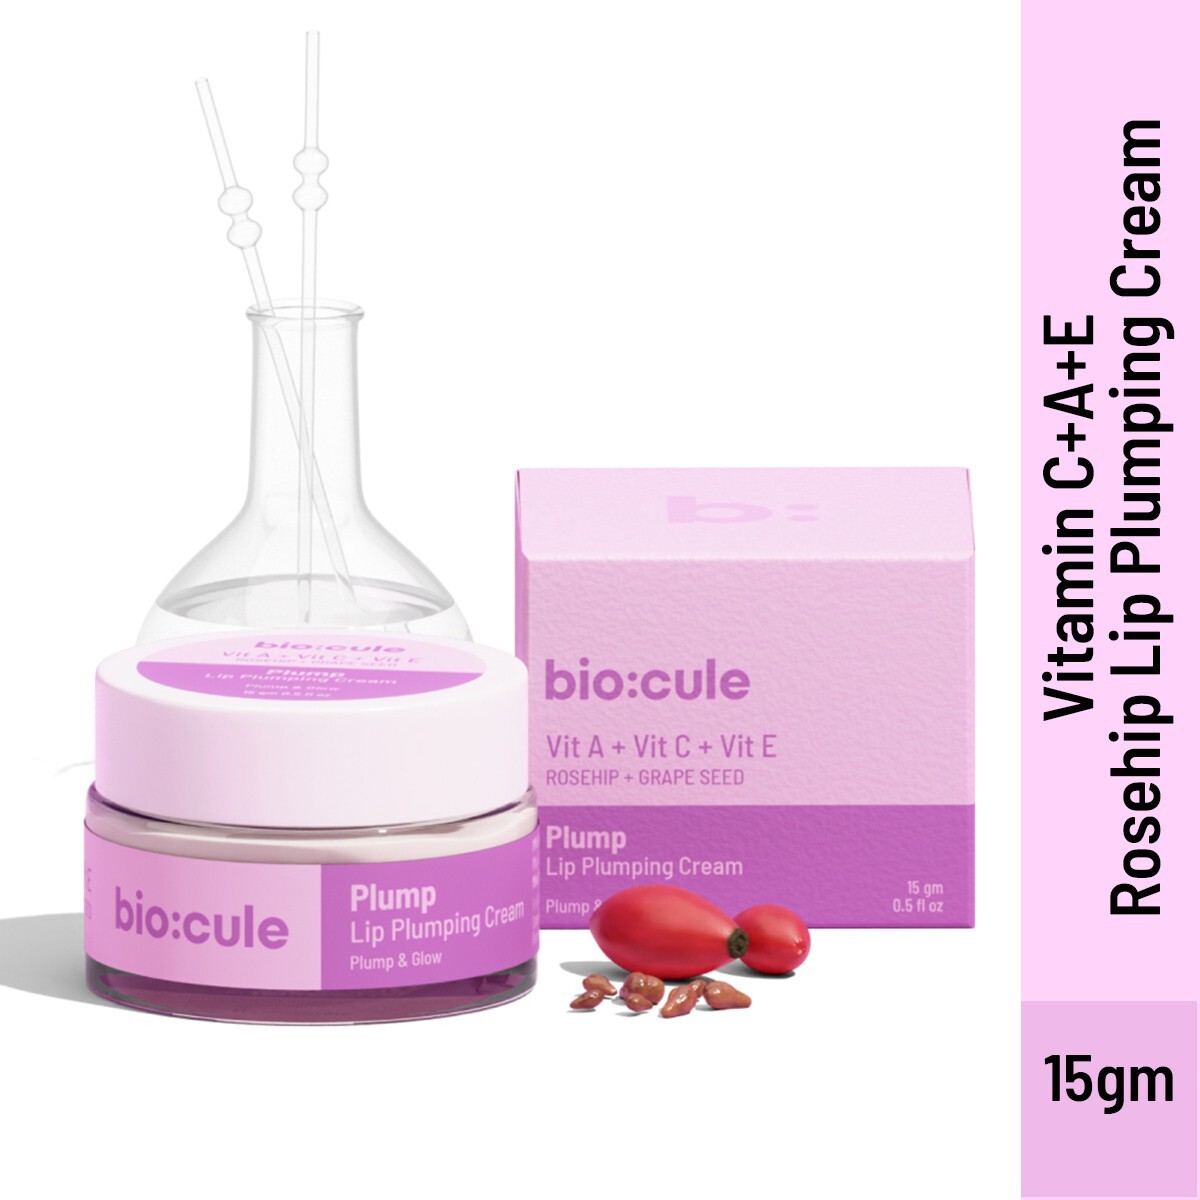 Biocule Plump Lip Plumping Cream for Soft, Plump & Glowing Lips with Vitamin A, Vitamin C & Vitamin E from Rosehip & Grapeseed